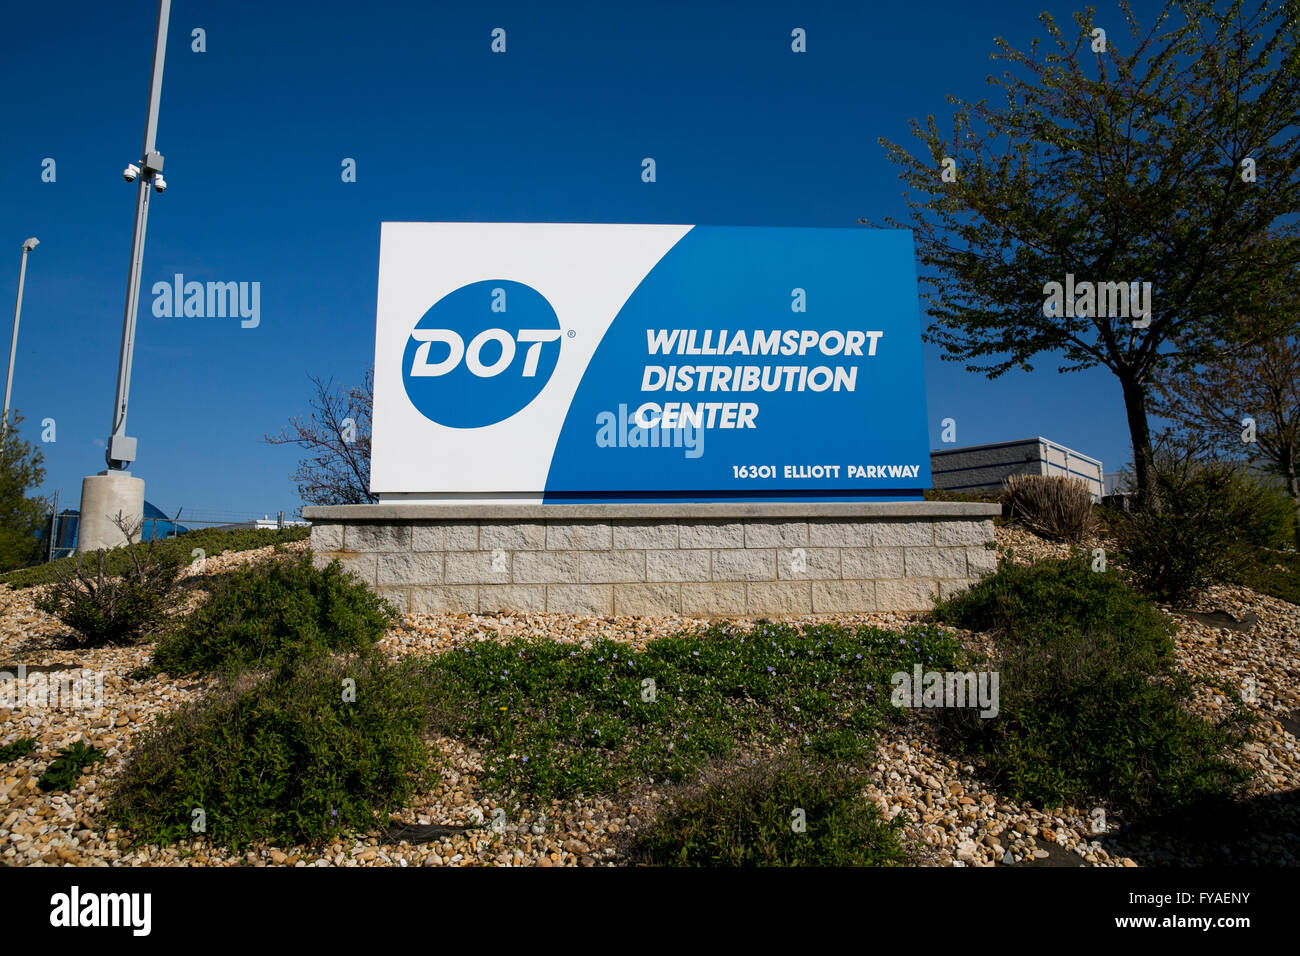 A logo sign outside of a facility occupied by Dot Foods, Inc., in Williamsport, Maryland on April 17, 2016. Stock Photo